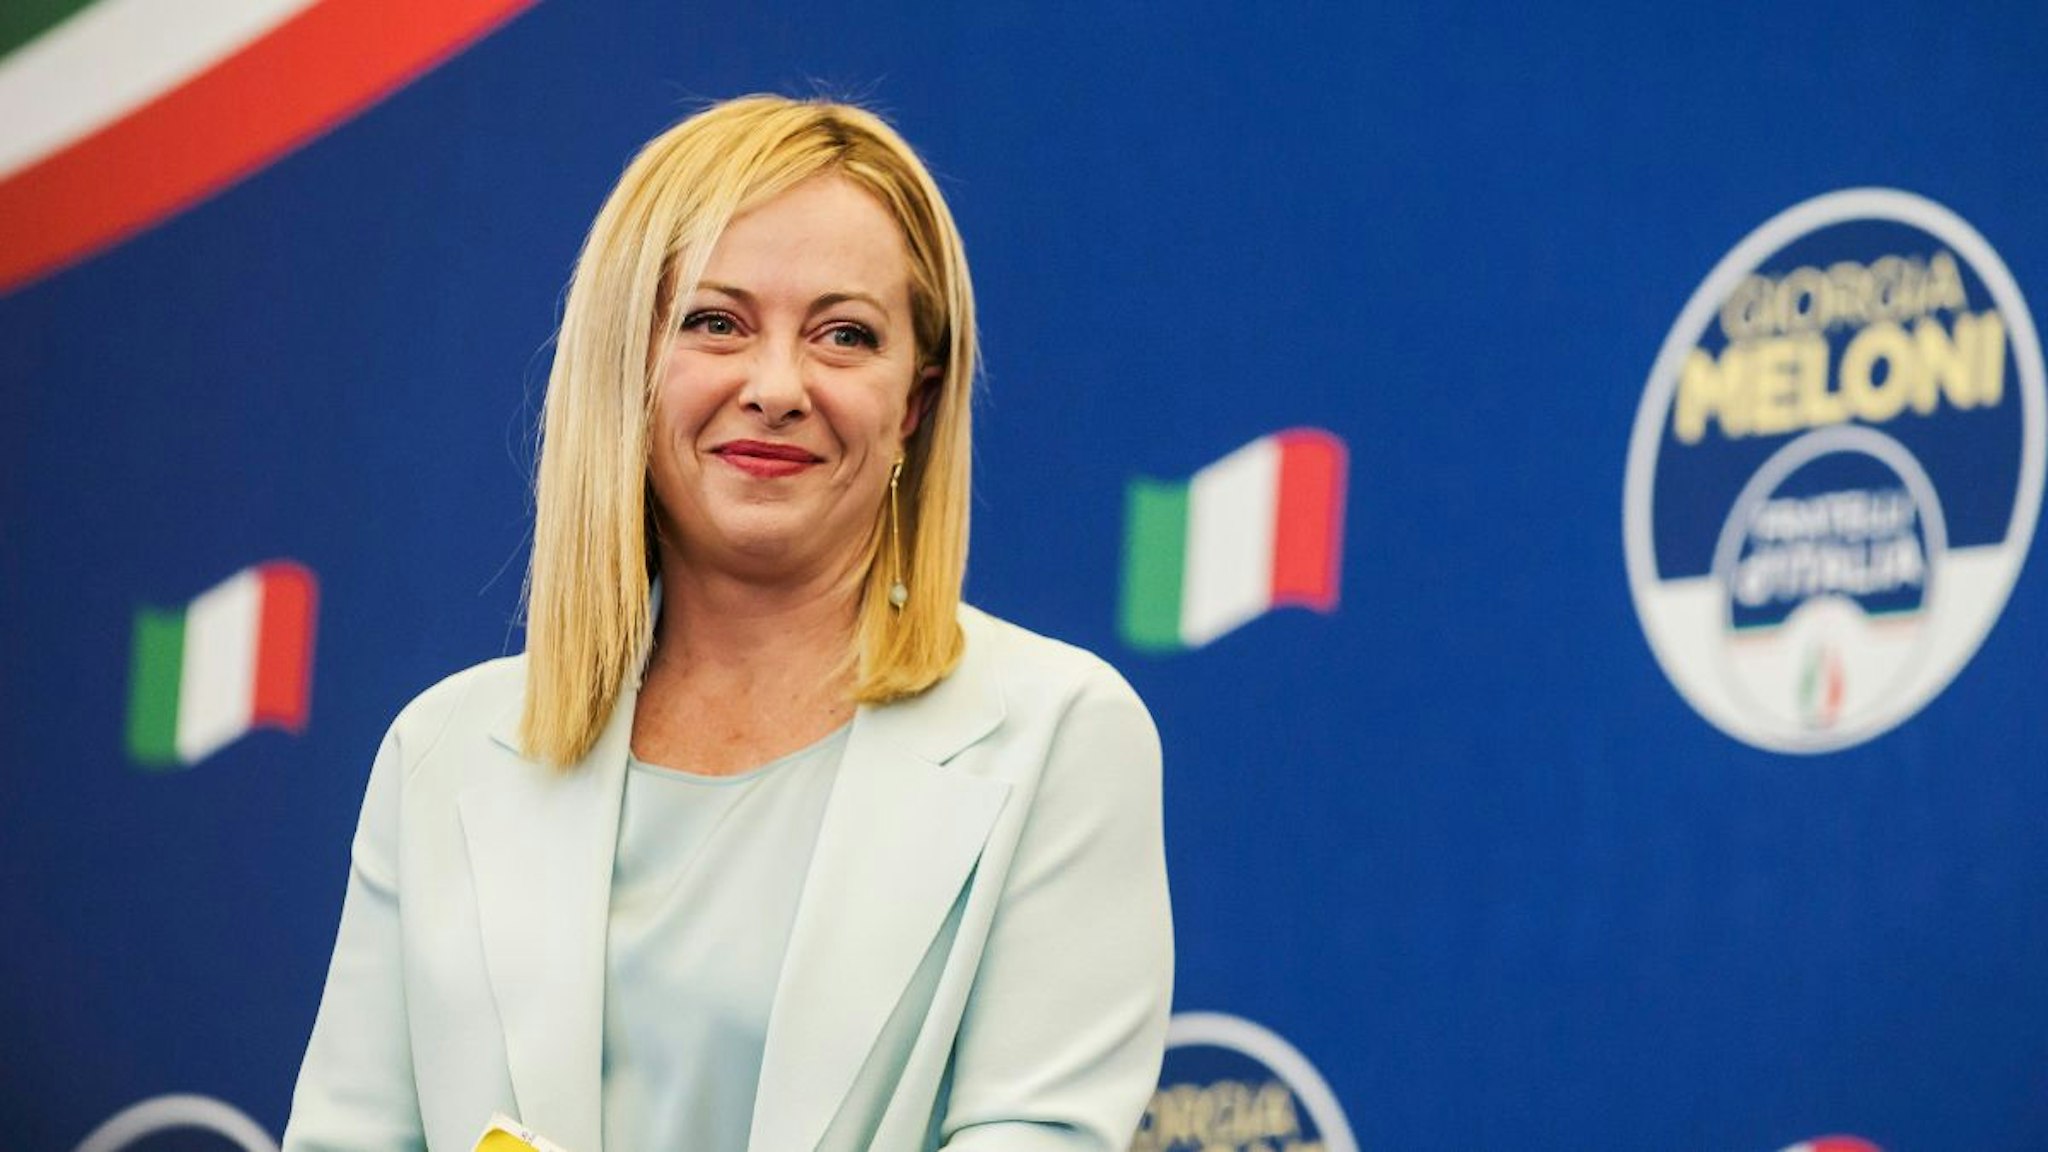 Giorgia Meloni is seen during a press conference.